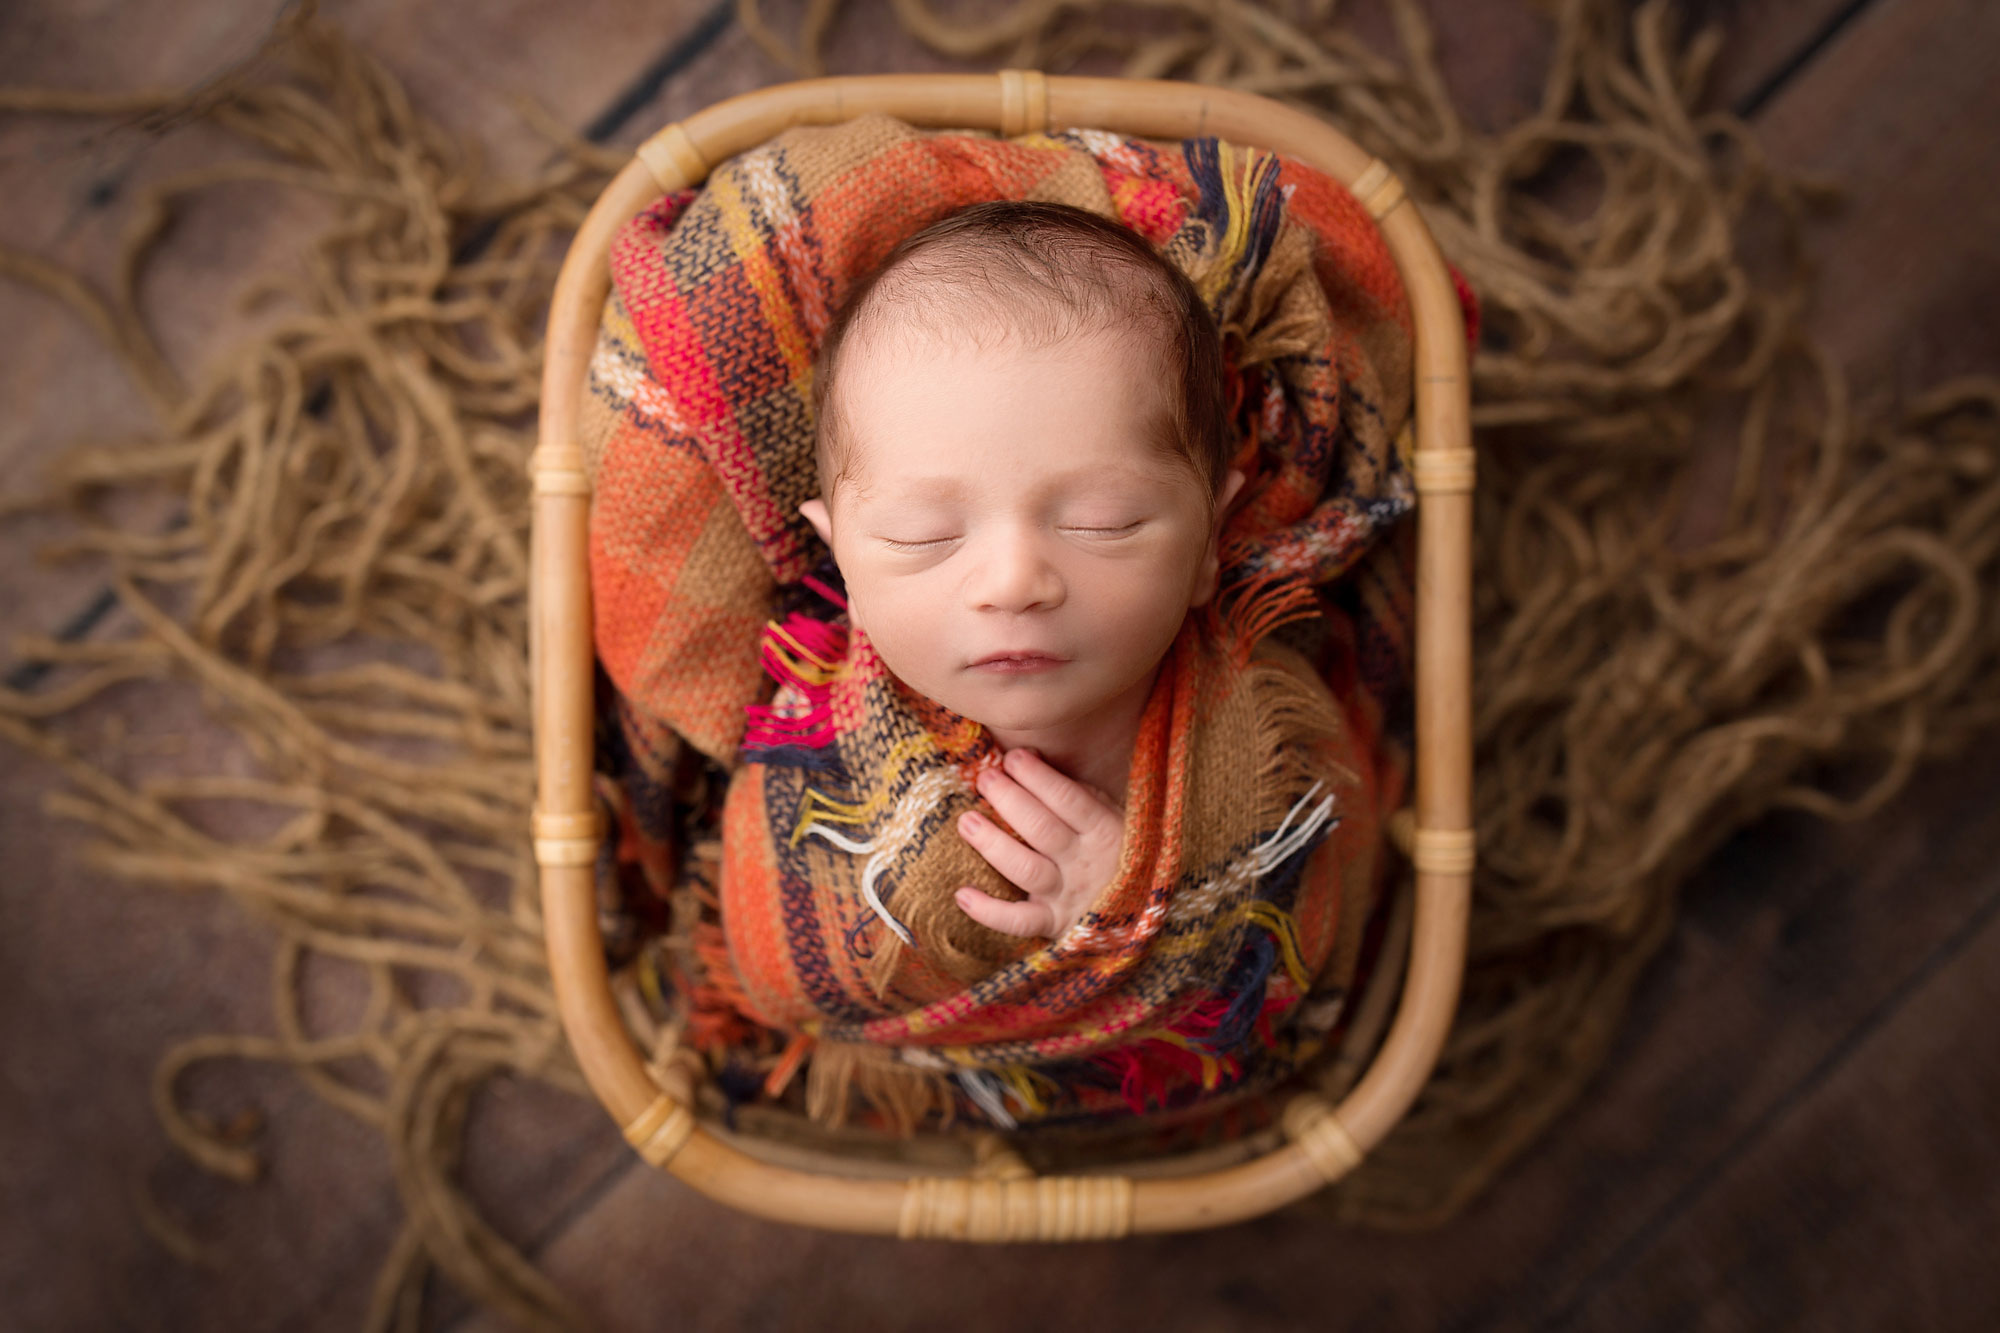 professional baby photos near me, baby in basket wrapped in colorful plaid blanket